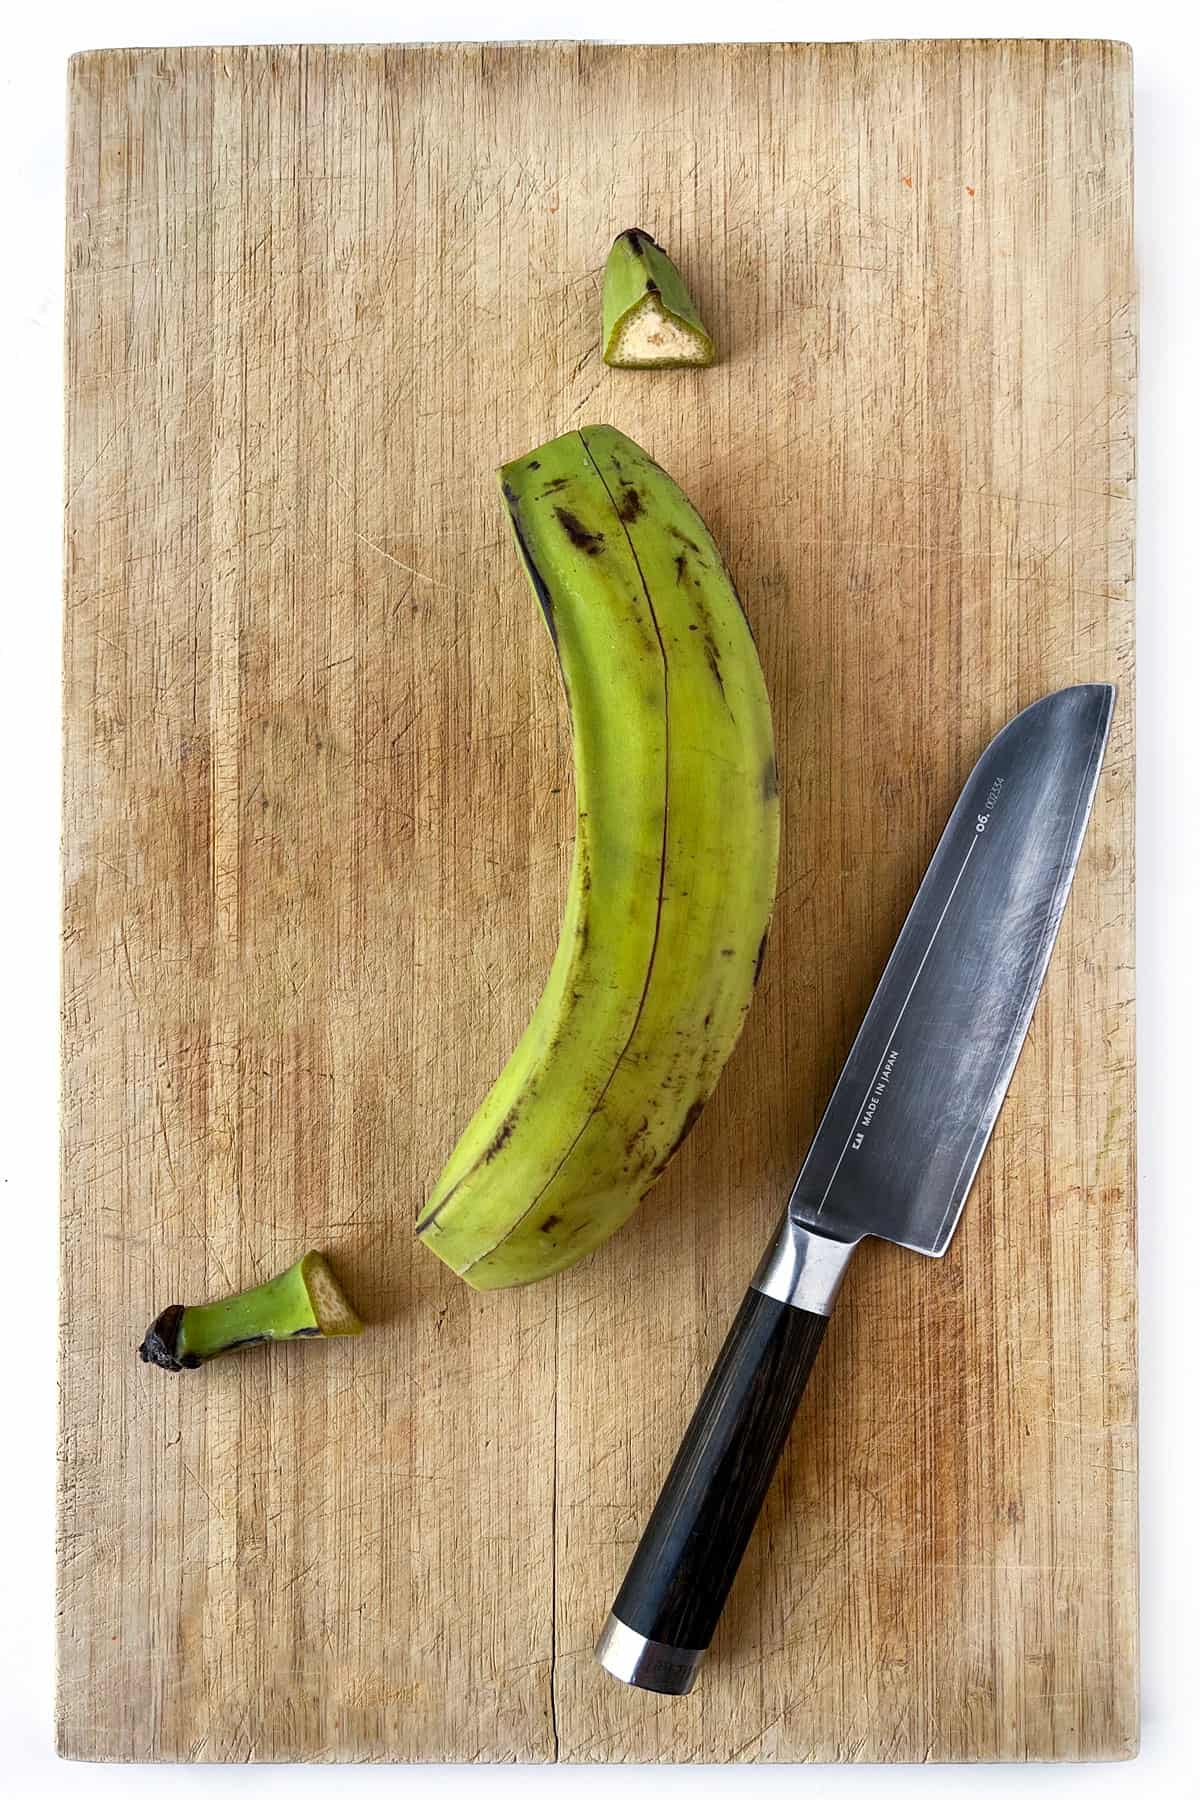 A green plantain with the ends snipped off and a slit cut into the skin from end to end, on a wooden cutting board with a knife